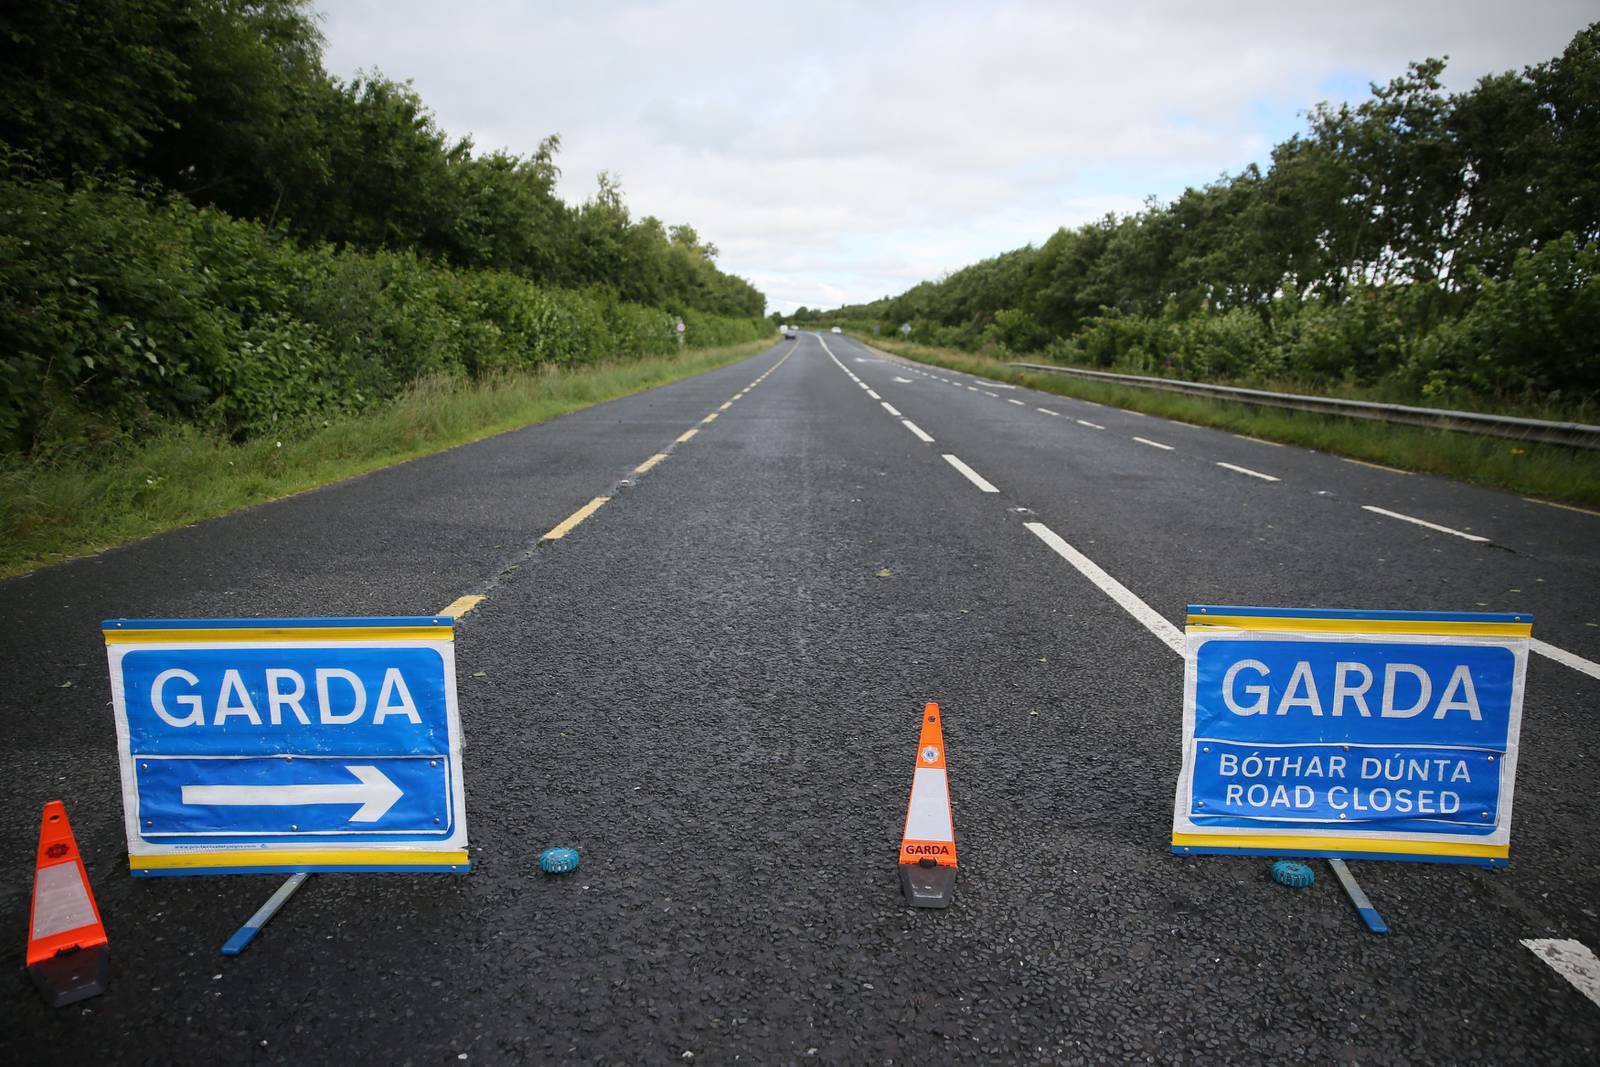 A Garda road closure close to the scene near Aclint Bridge in Ardee, Co Louth, after three women were killed and two men seriously injured in a road accident involving three cars. PRESS ASSOCIATION Photo. Picture date: Friday July 21, 2017. Gardai said one woman, aged 39, was driving one of the cars, and the two other women, aged 69 and 37, were passengers. See PA story ACCIDENT Deaths Ireland. Photo credit should read: Brian Lawless/PA Wire